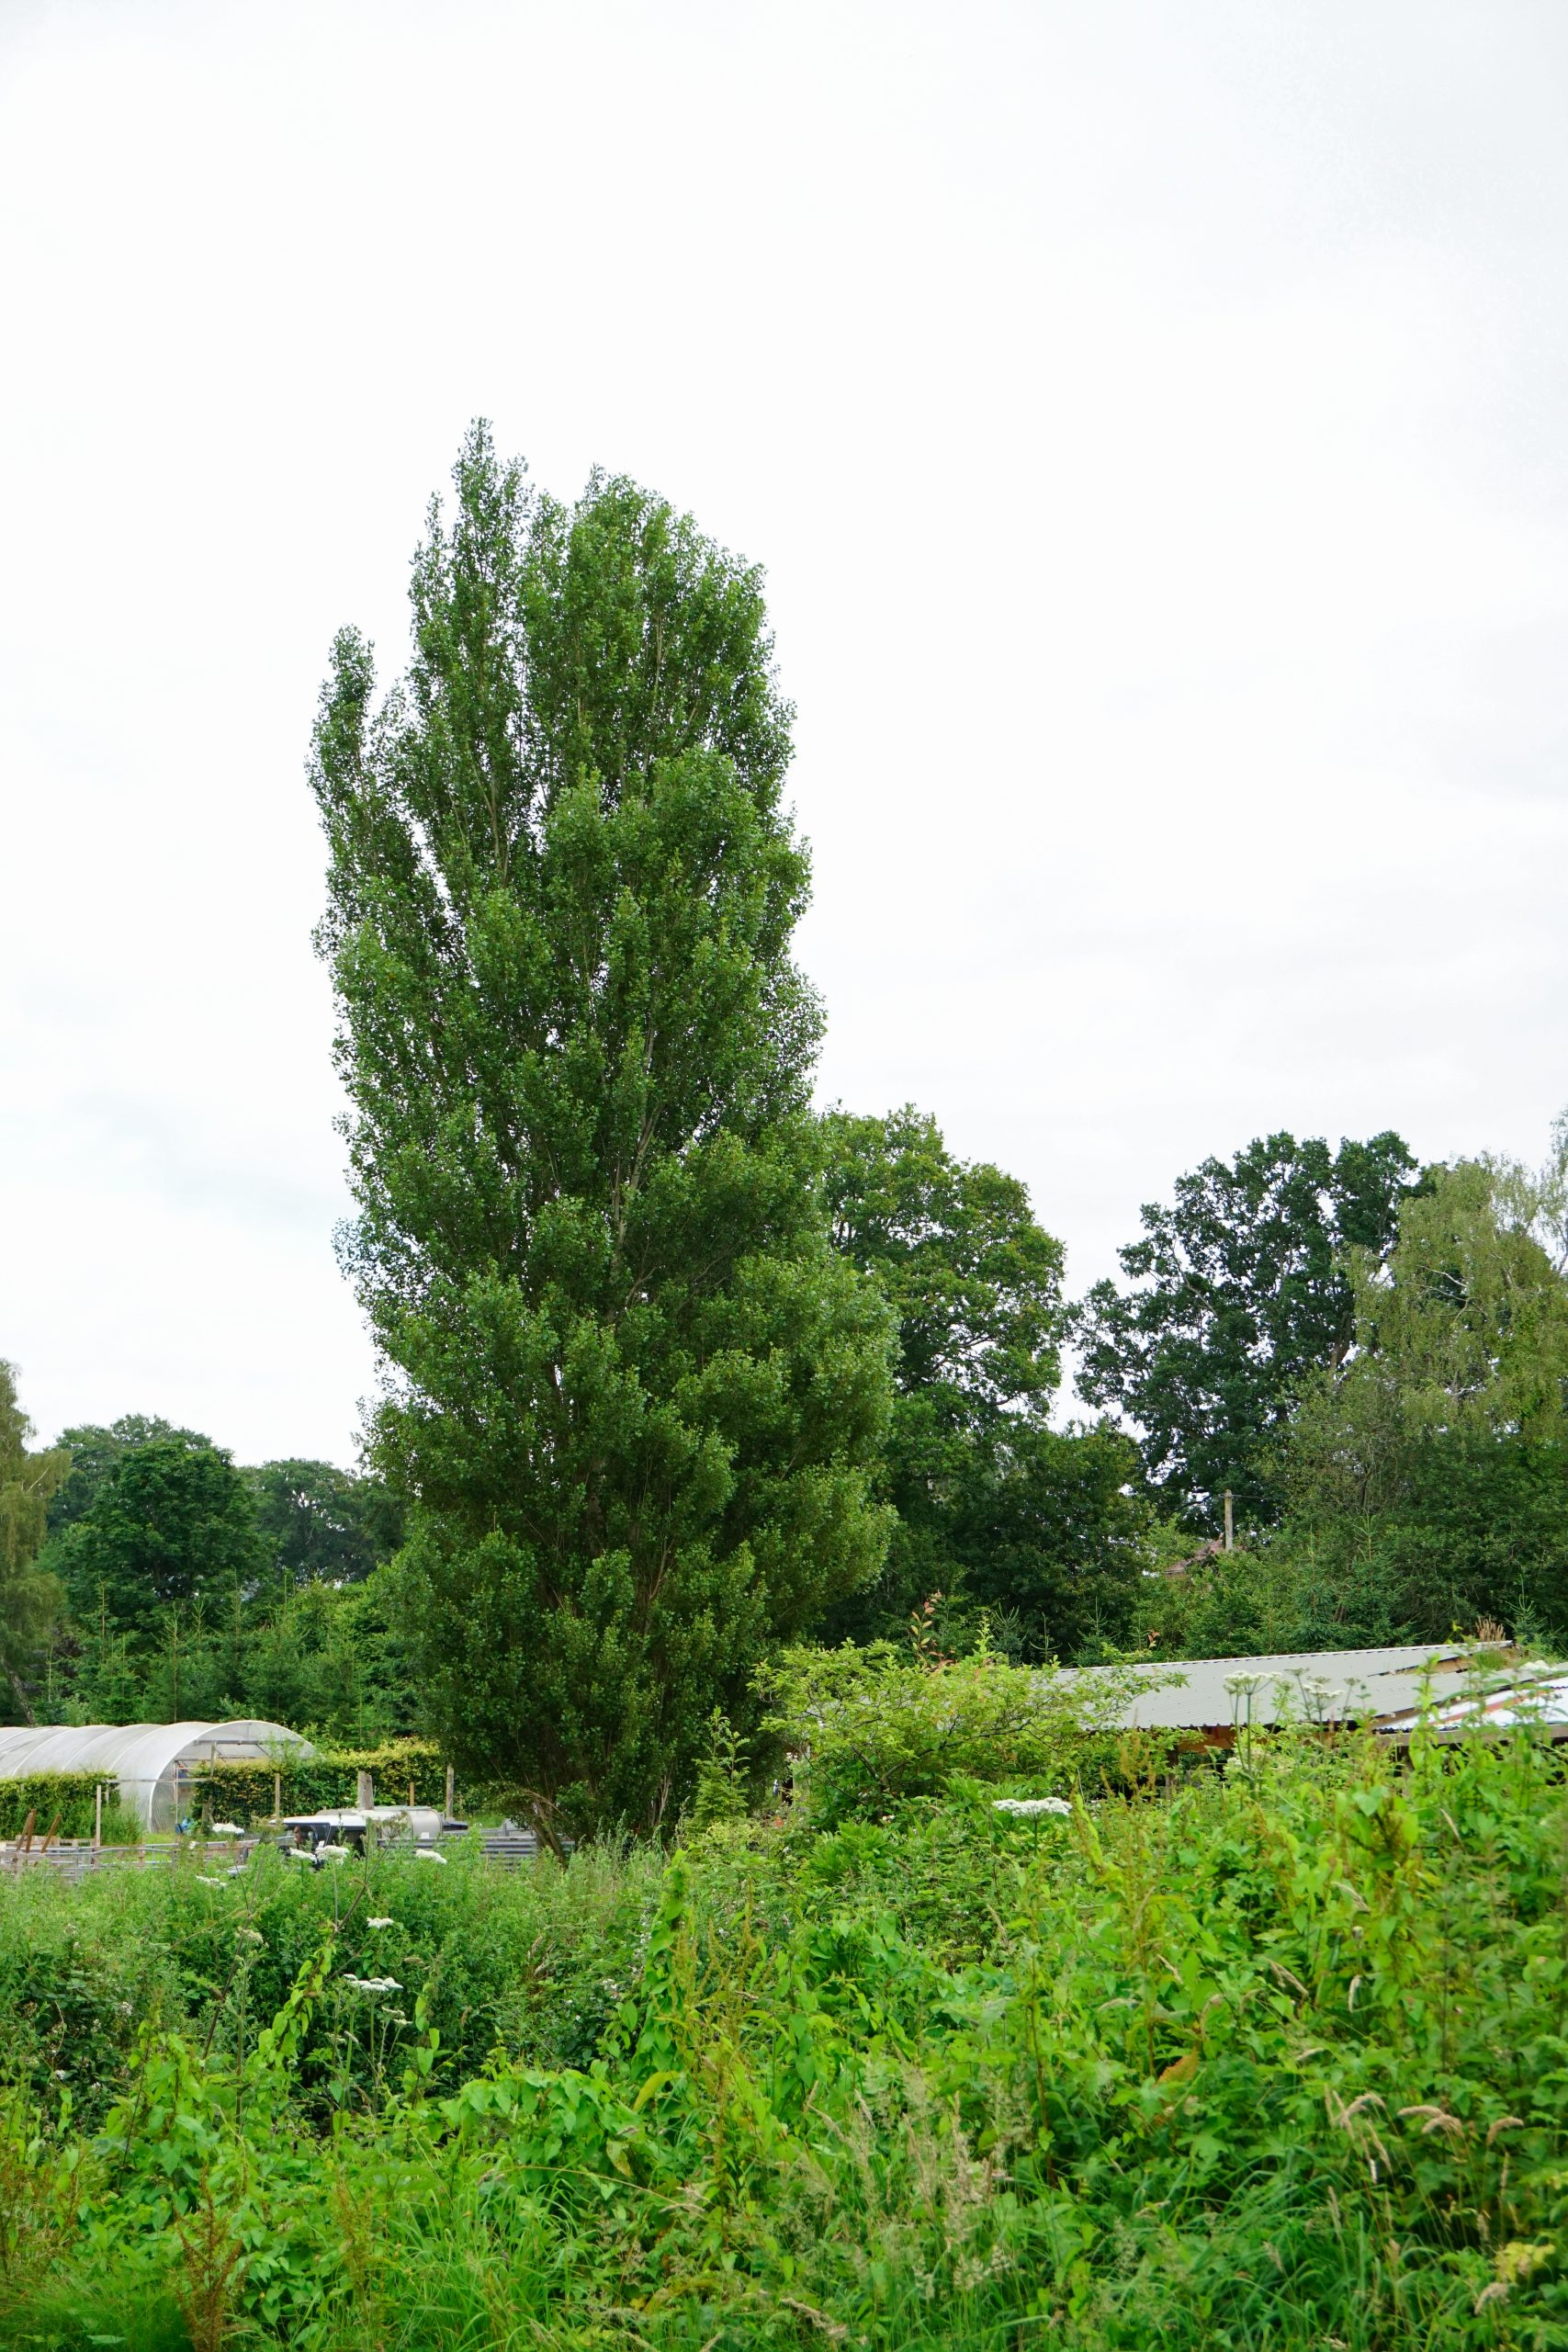 Wylds Farm: Its trees & the Petersfield By-pass